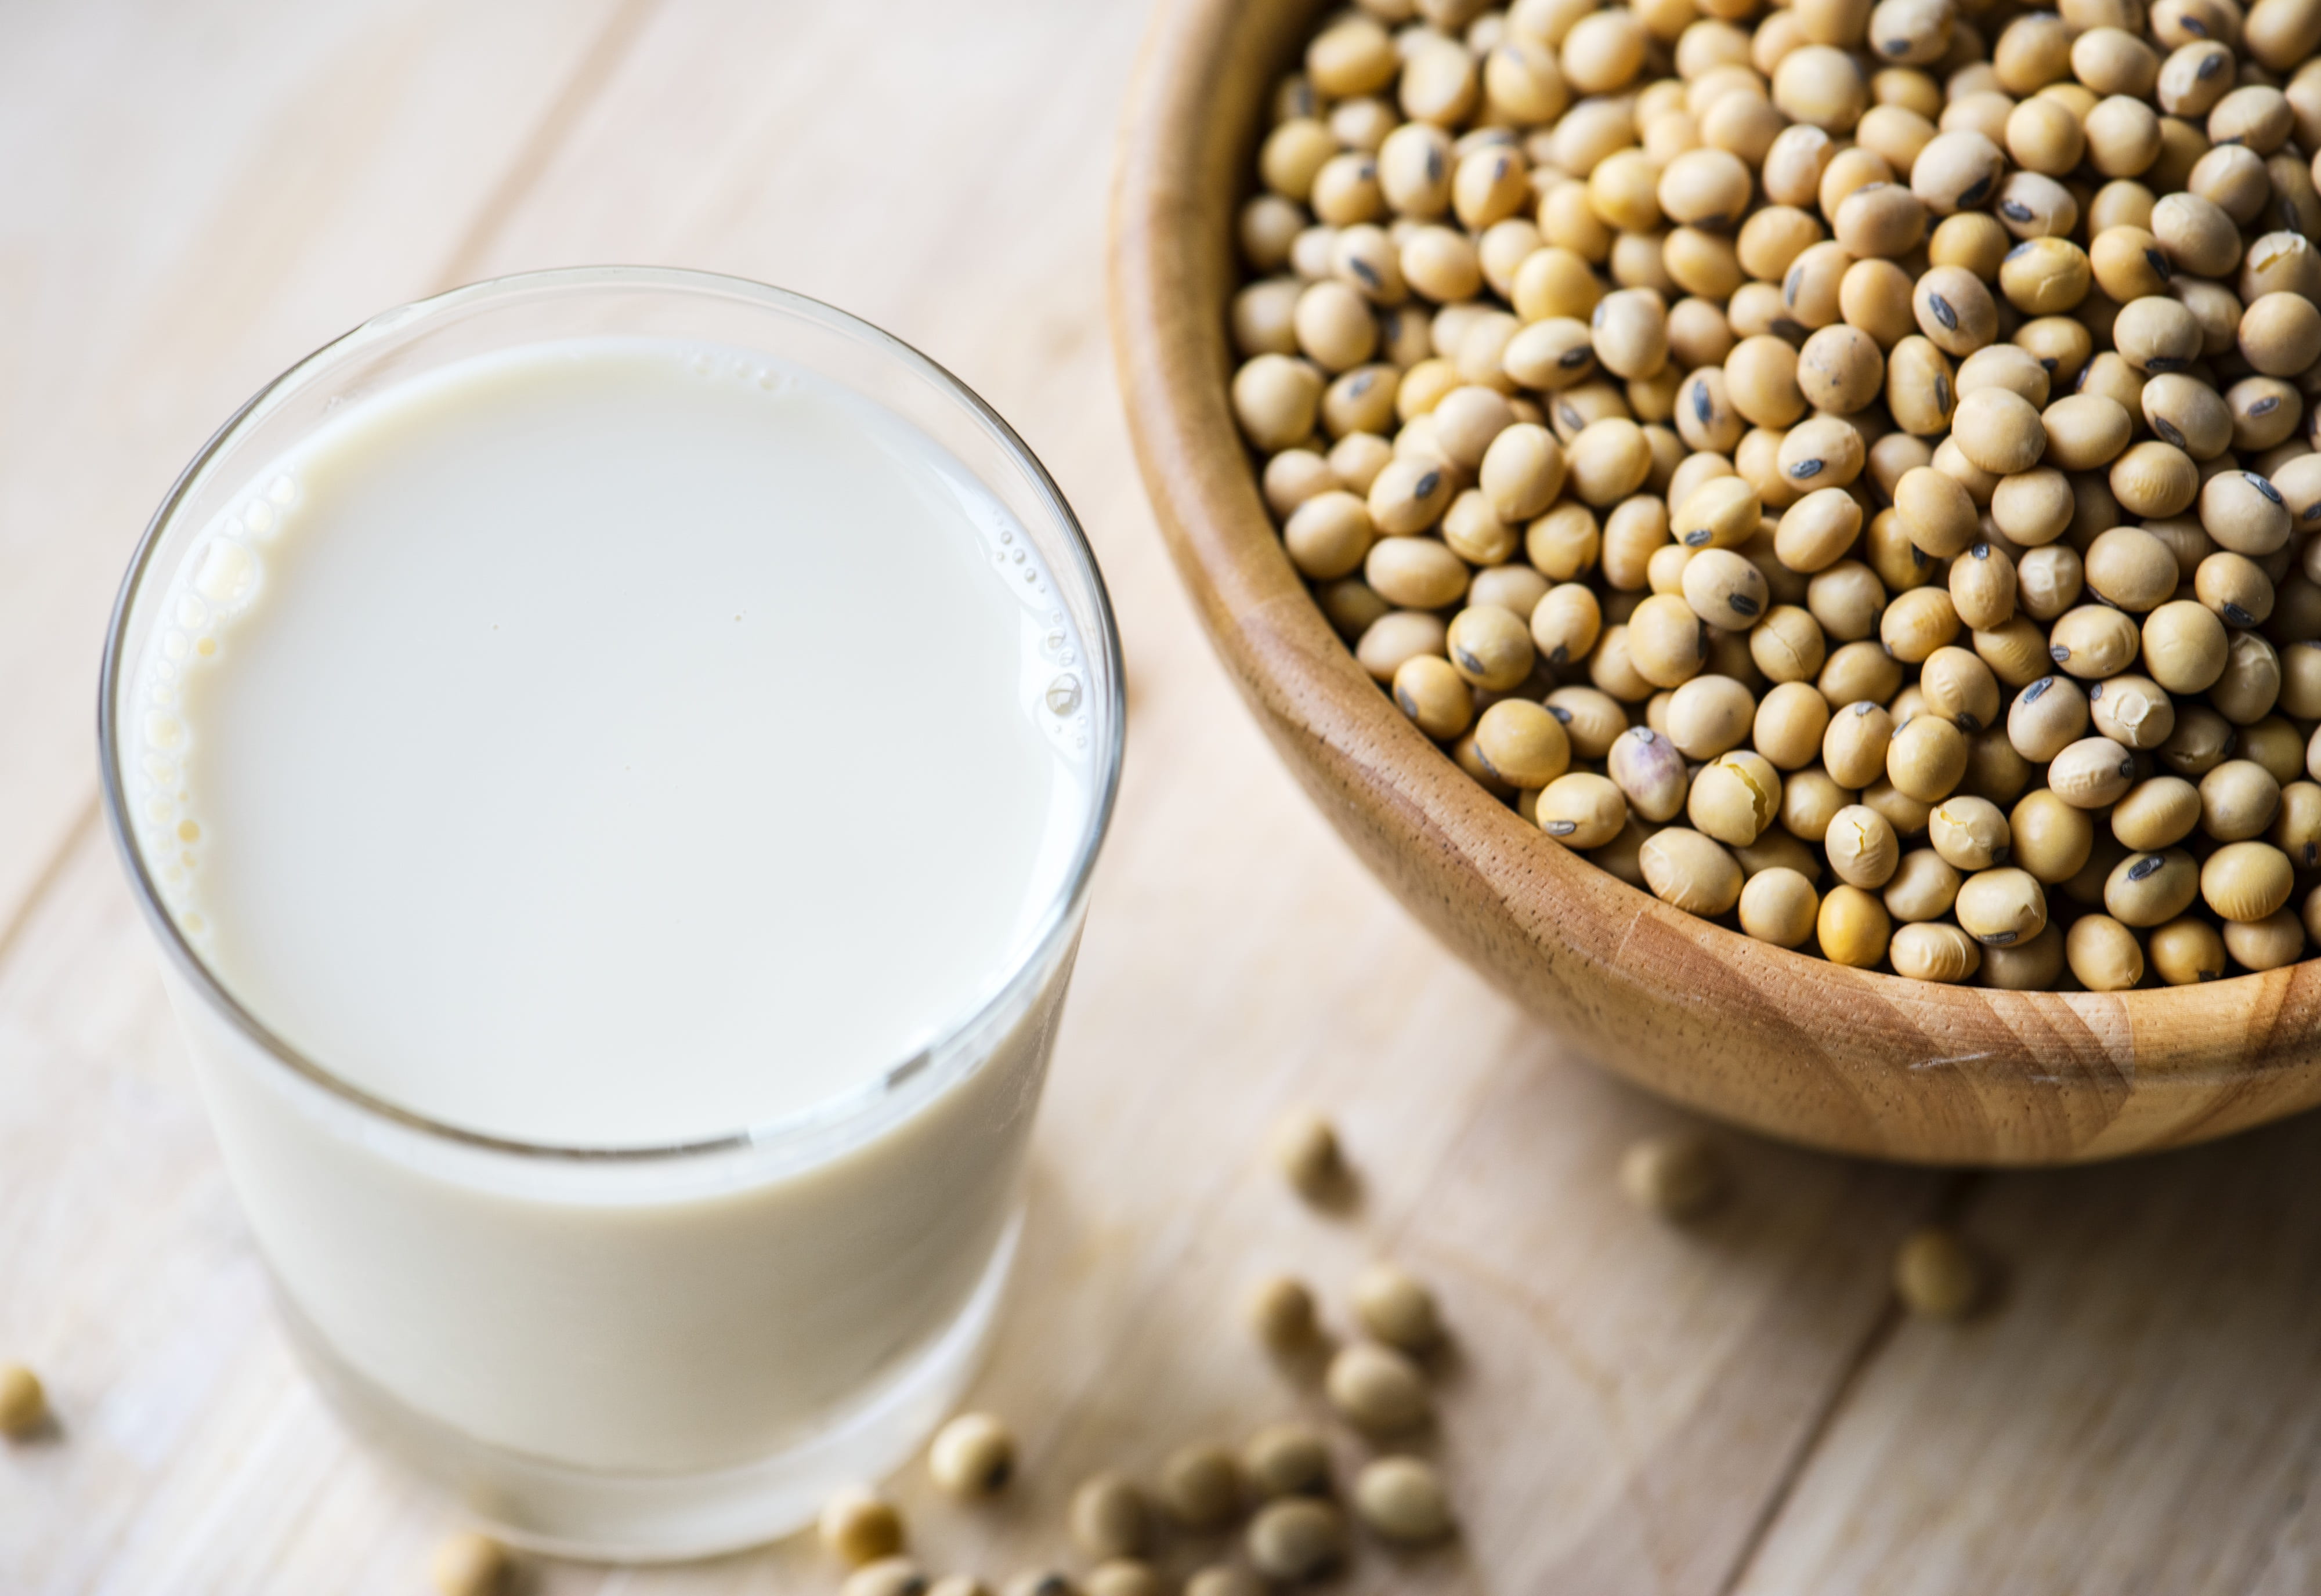 soy milk beside beans, beverage, calcium, closeup, drink, food photography